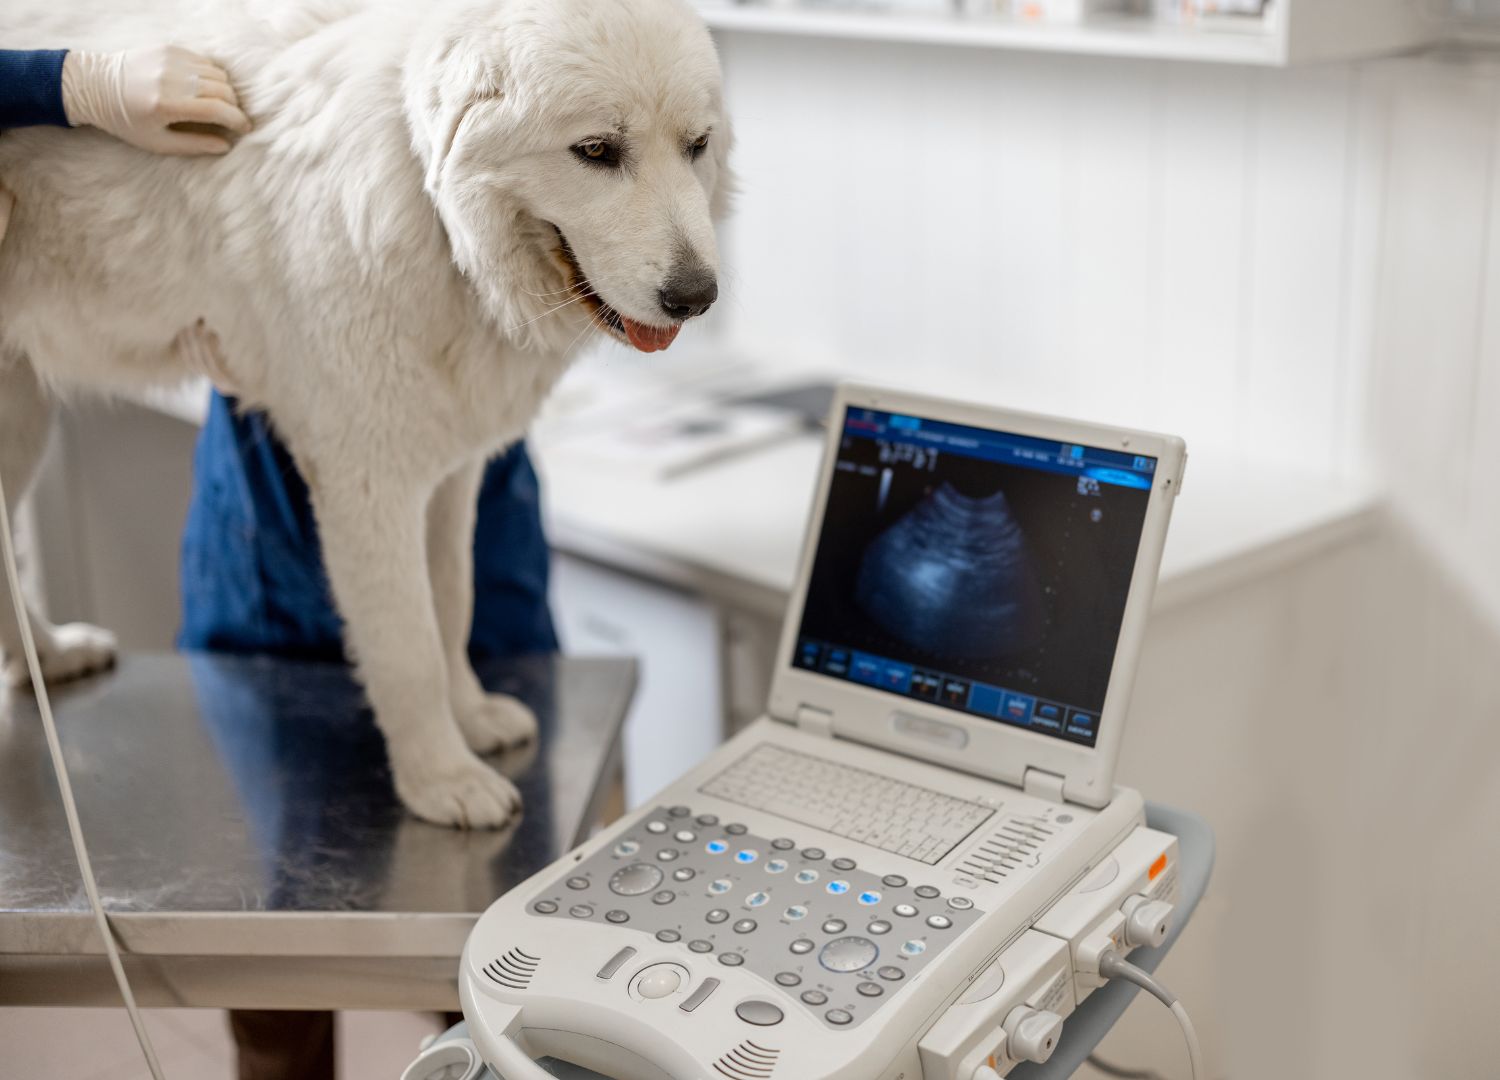 A dog standing on a table with an ultrasound machine